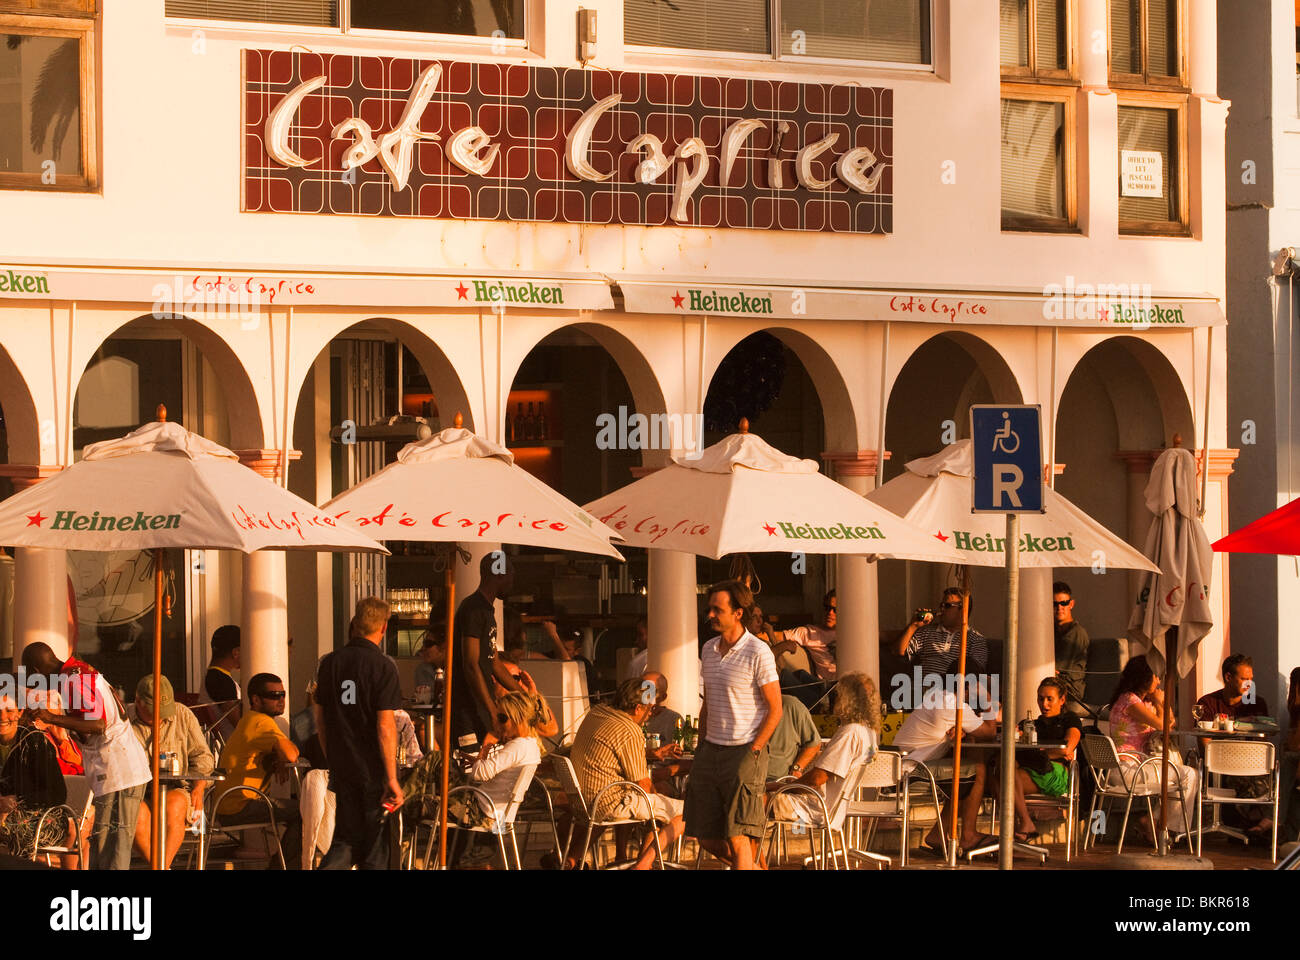 Cafe Caprice, Camps Bay, South Africa Stock Photo - Alamy